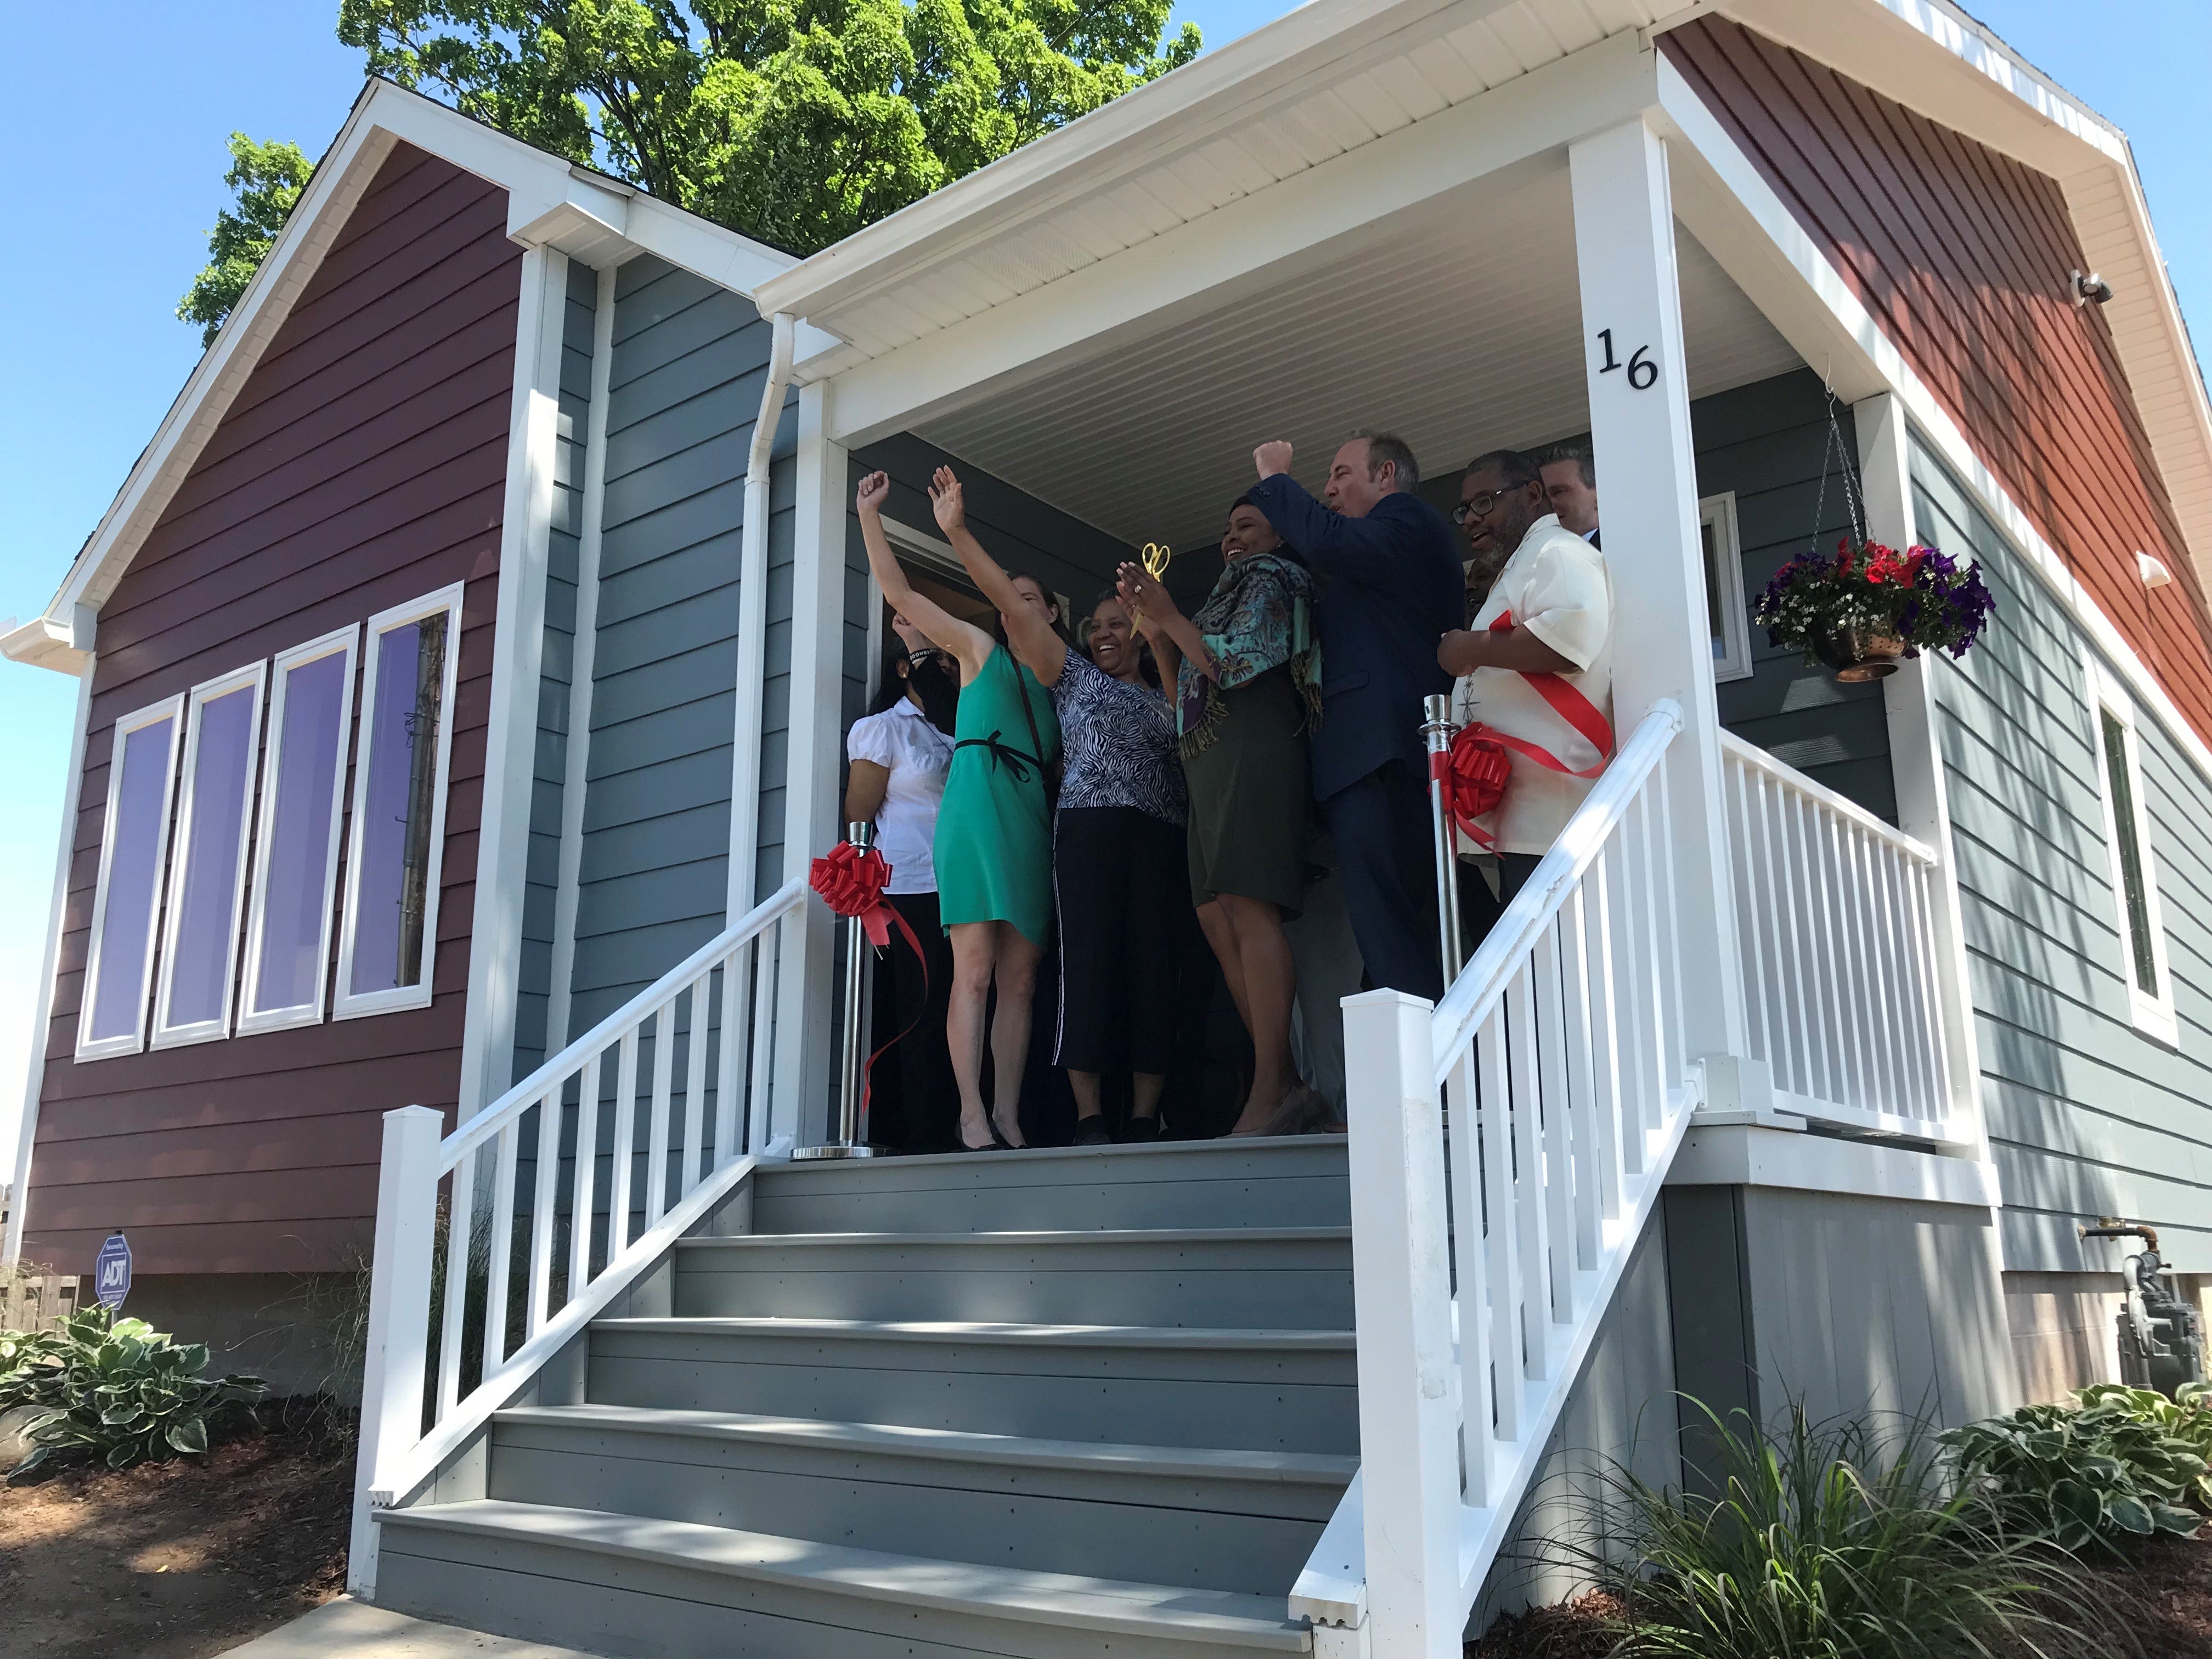 Great-grandma becomes first-time homeowner: &apos;It will change my life&apos;